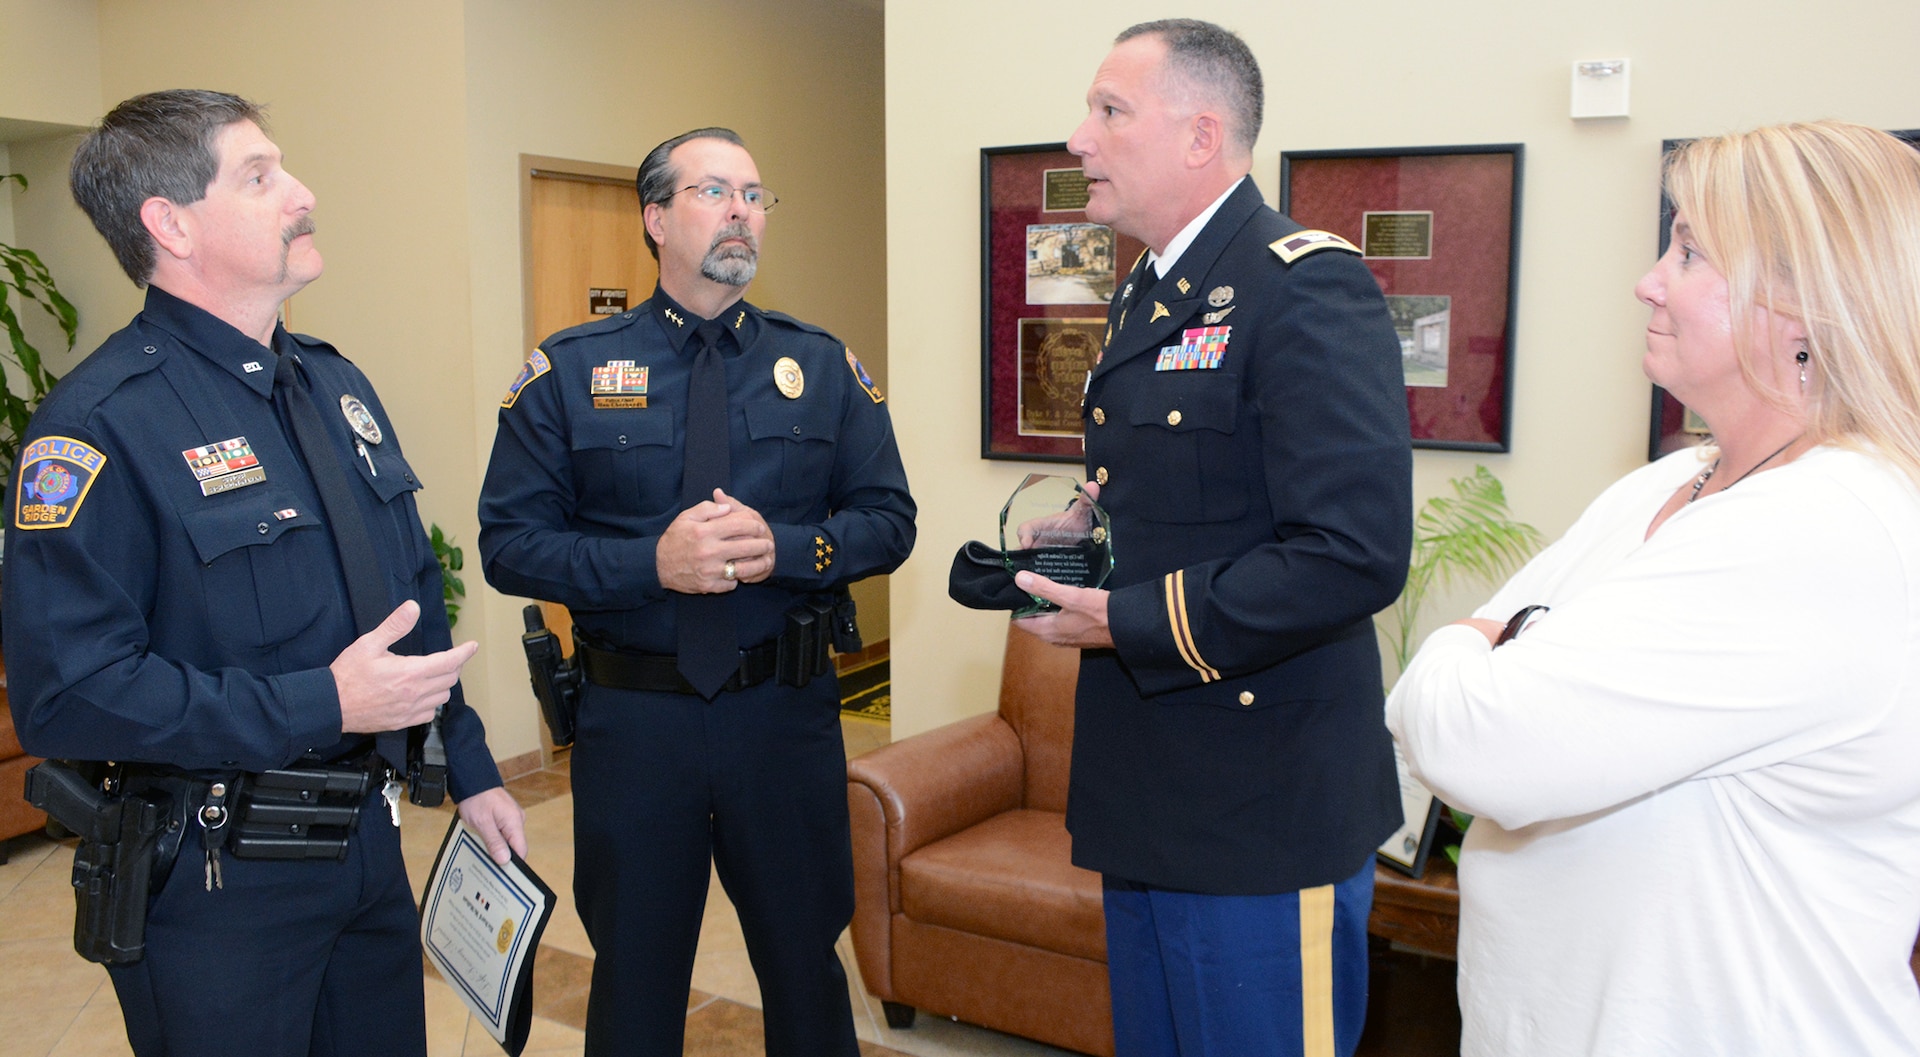 Col. (Dr.) Lance Cordoni holds the award he received March 1 while talking with City of Garden Ridge police officer Richard McMahan (left), Police Chief Ron Eberhardt, and his wife, Allyson Cordoni. Cordoni helped save the life of a neighbor who had suffered a heart attack Nov. 20, 2016.